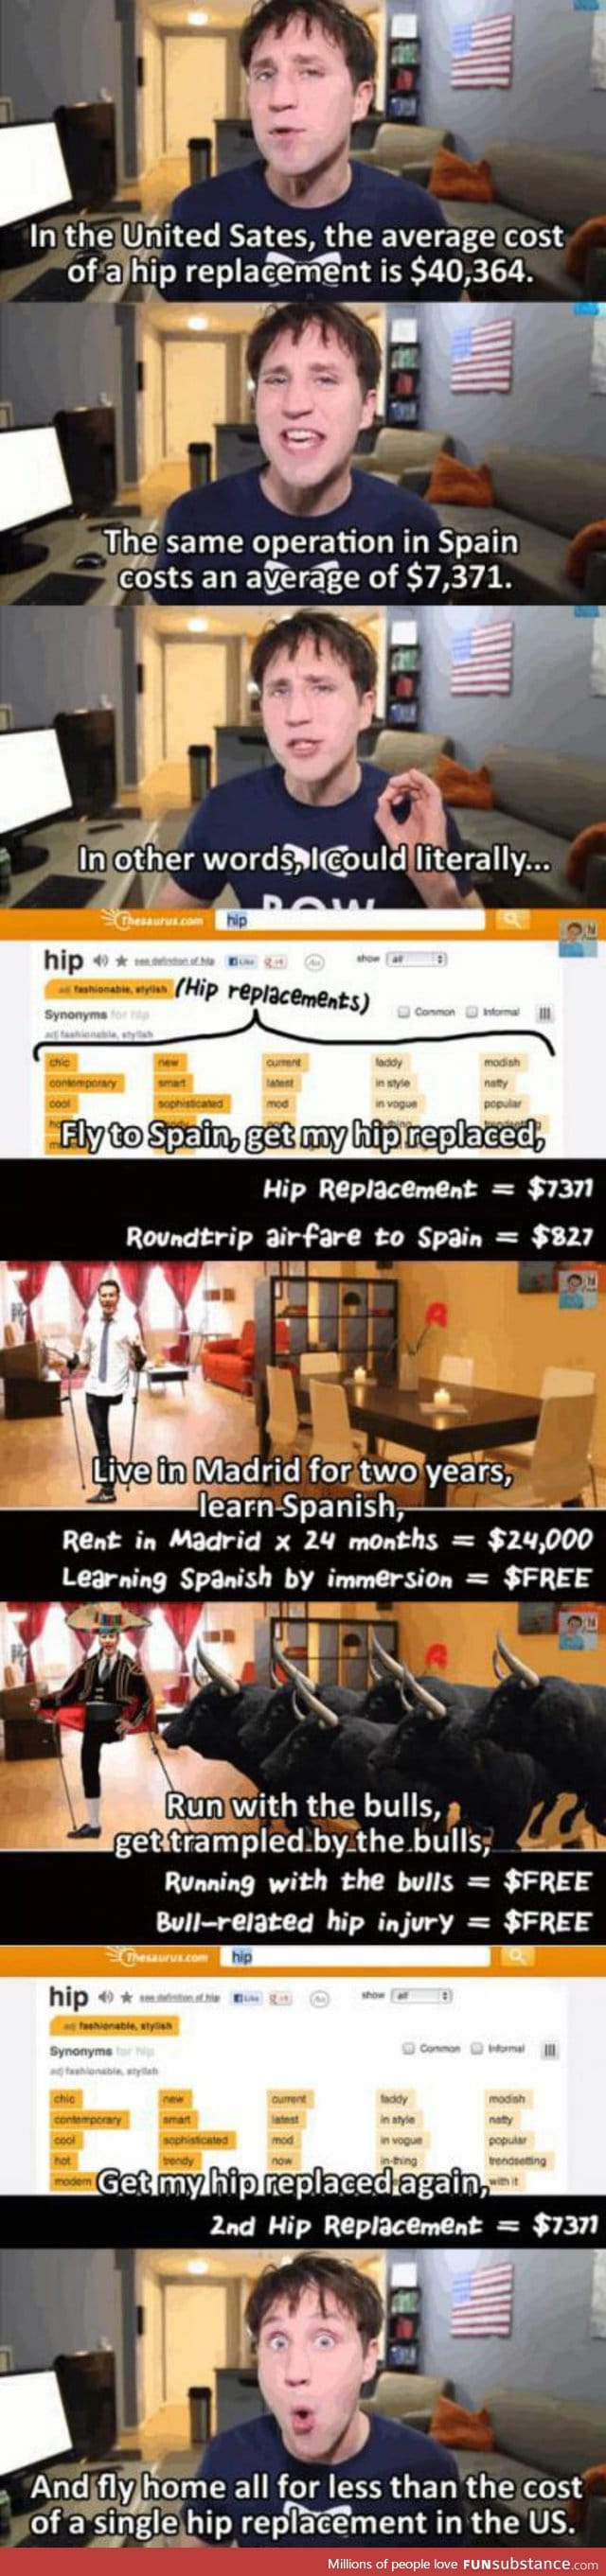 Hip replacement in spain